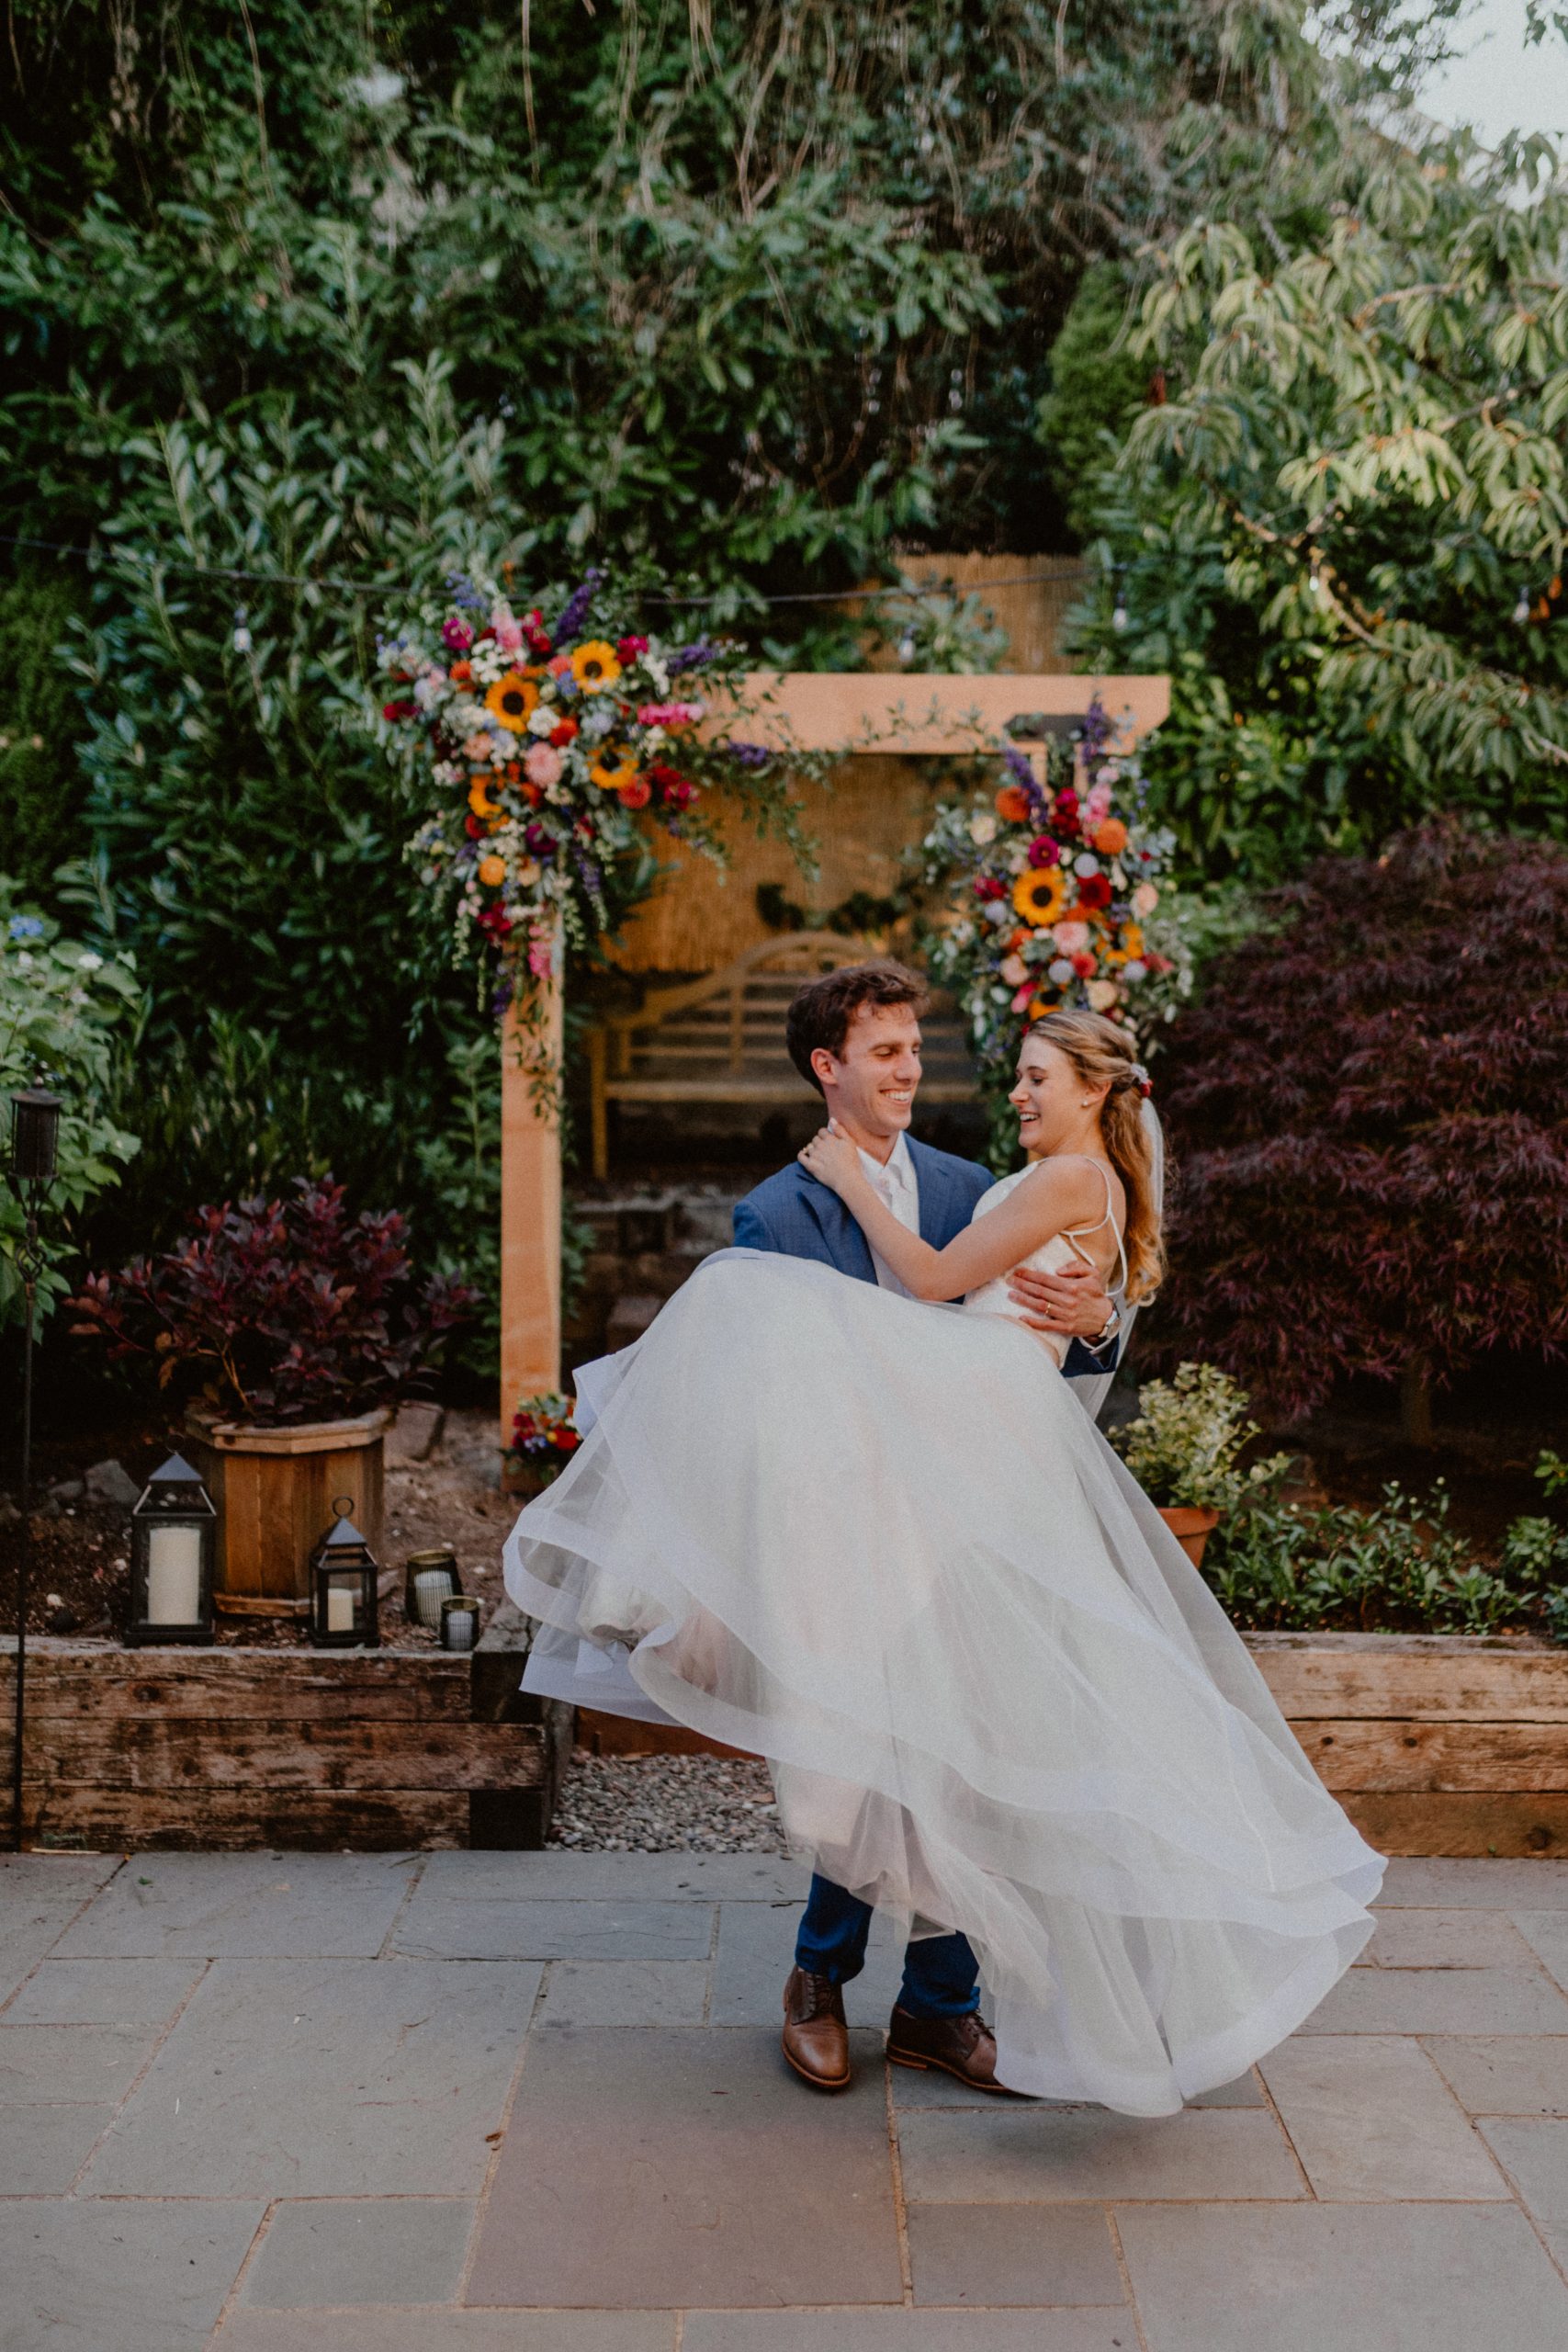 Groom picks up Bride and spins her around in front of outdoor flower arch during wedding ceremony of outdoor Seattle Elopement Wedding | Washington State Elopement Photographer, Seattle Elopement Photographer, Newlywed Elopement Photographer, Quarantine Wedding Elopement Inspiration | chelseaabril.com